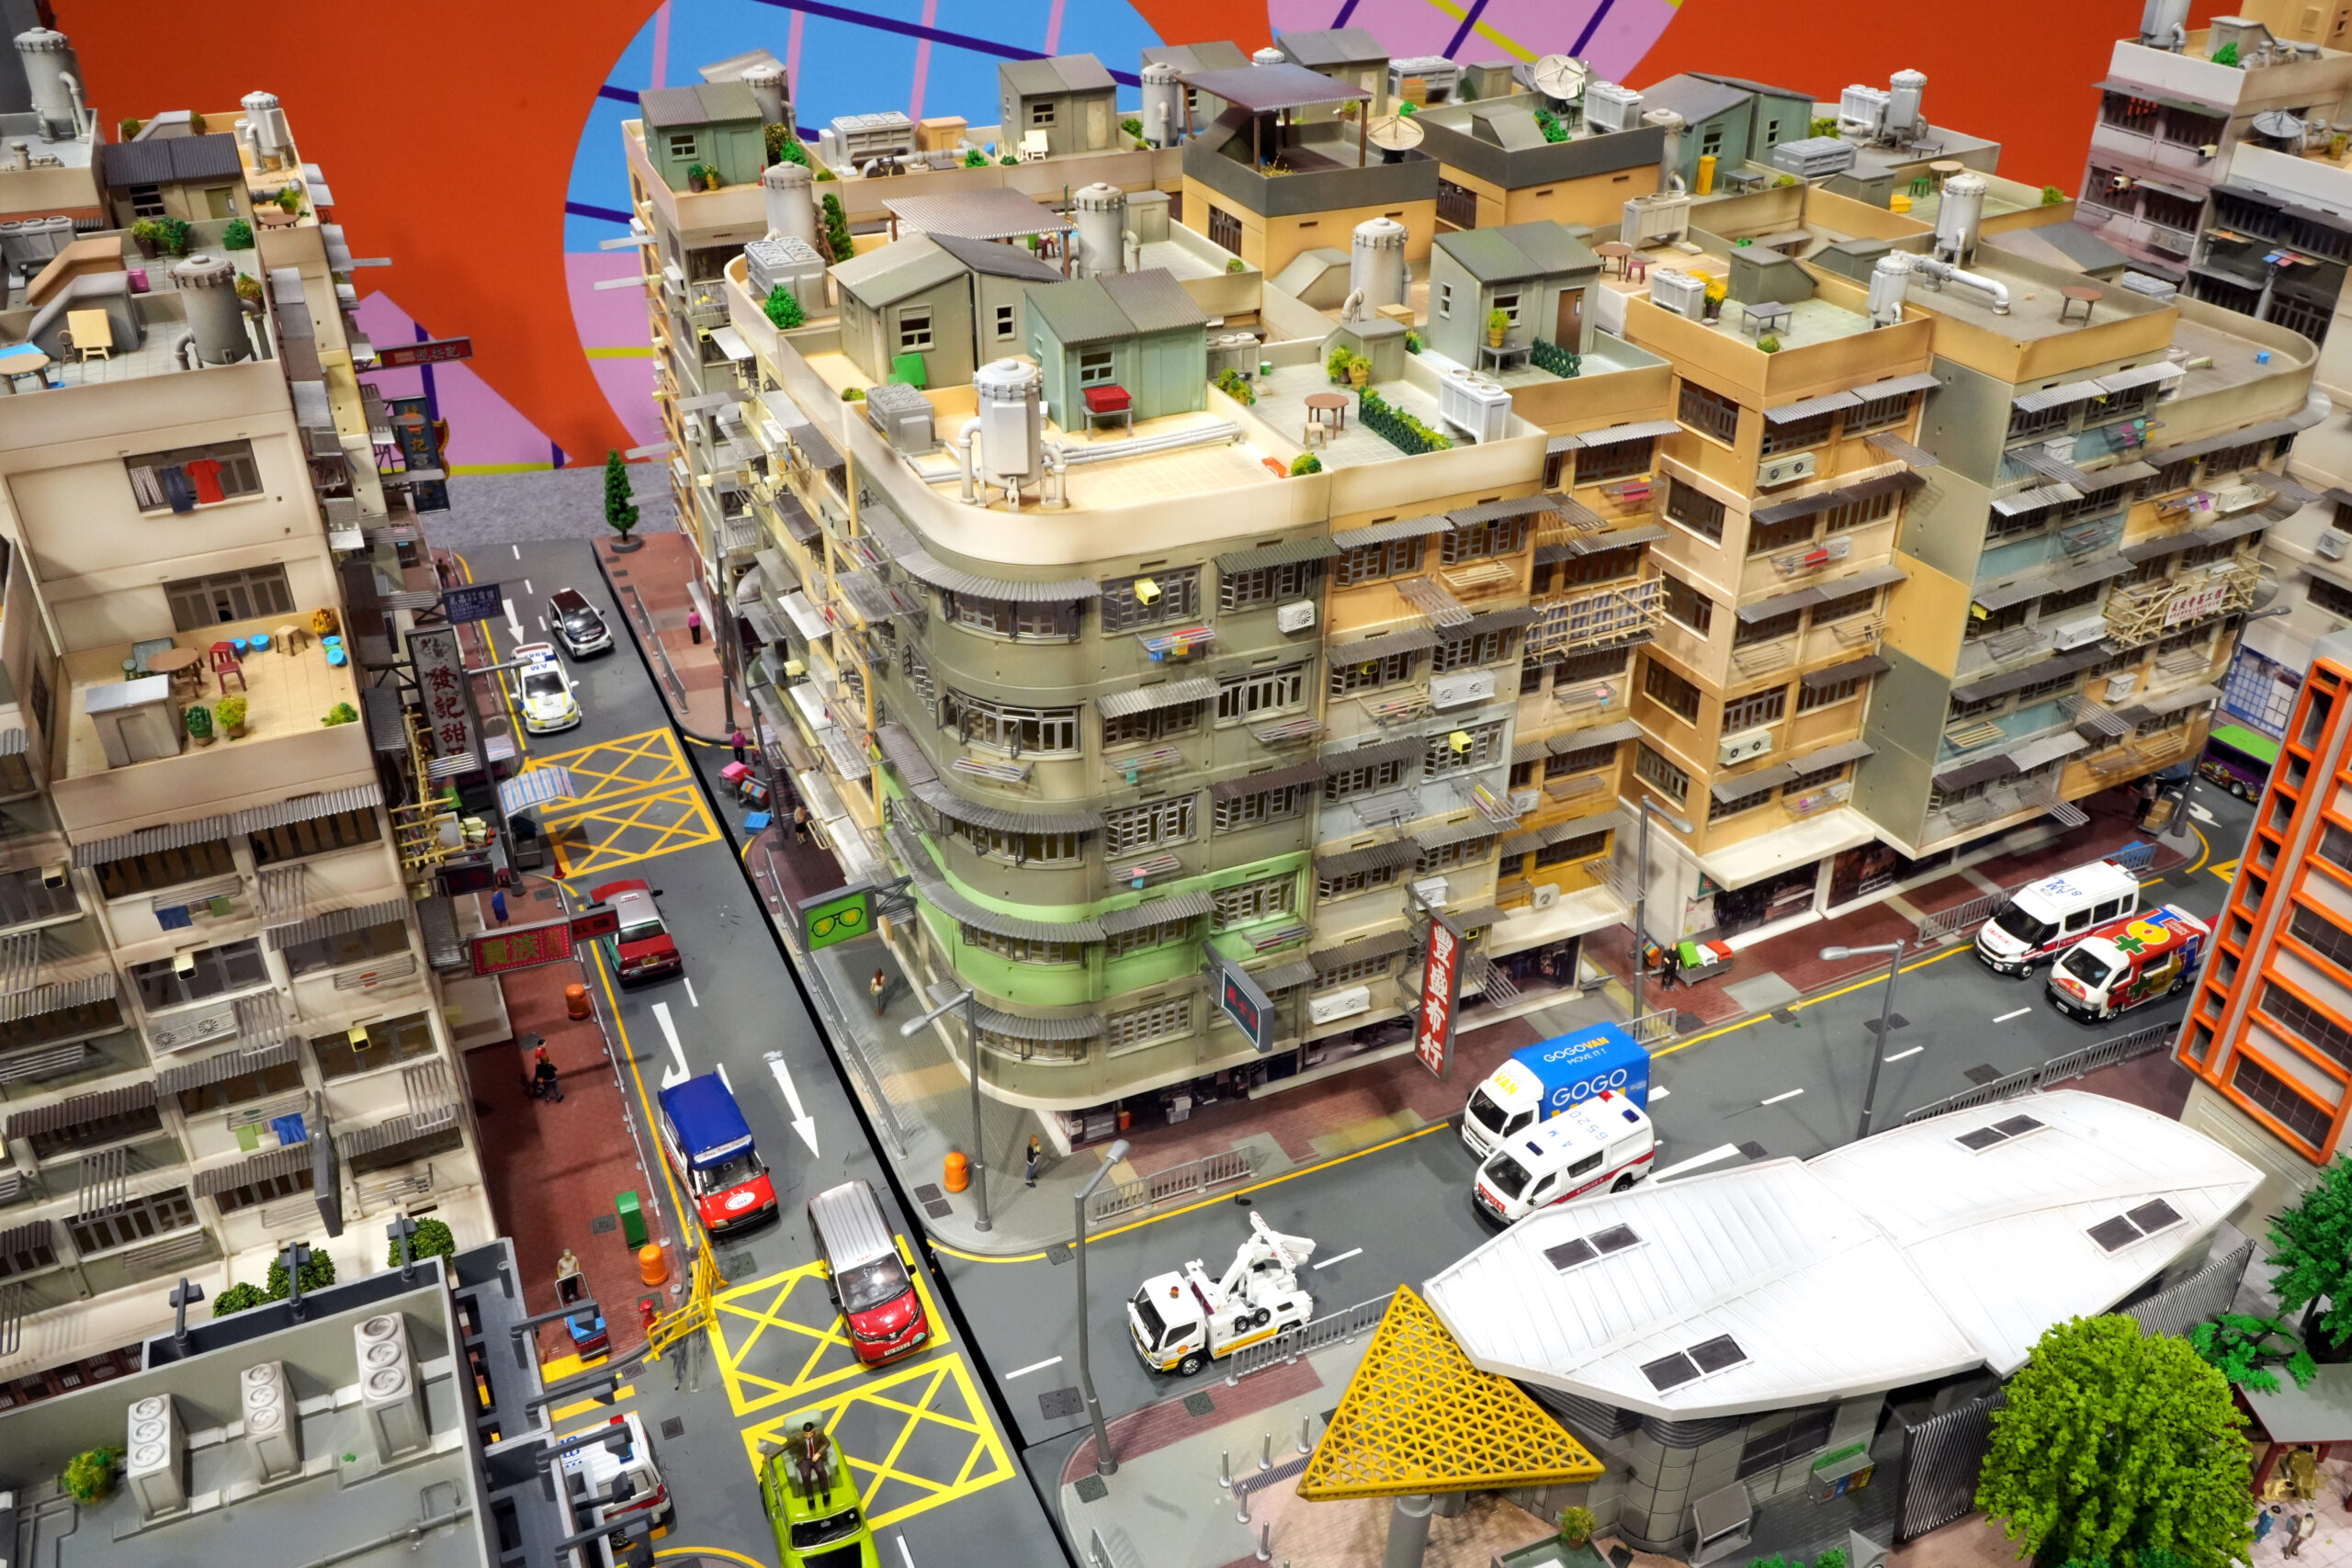 Miniature model that illustrated Hong Kong’s old community.